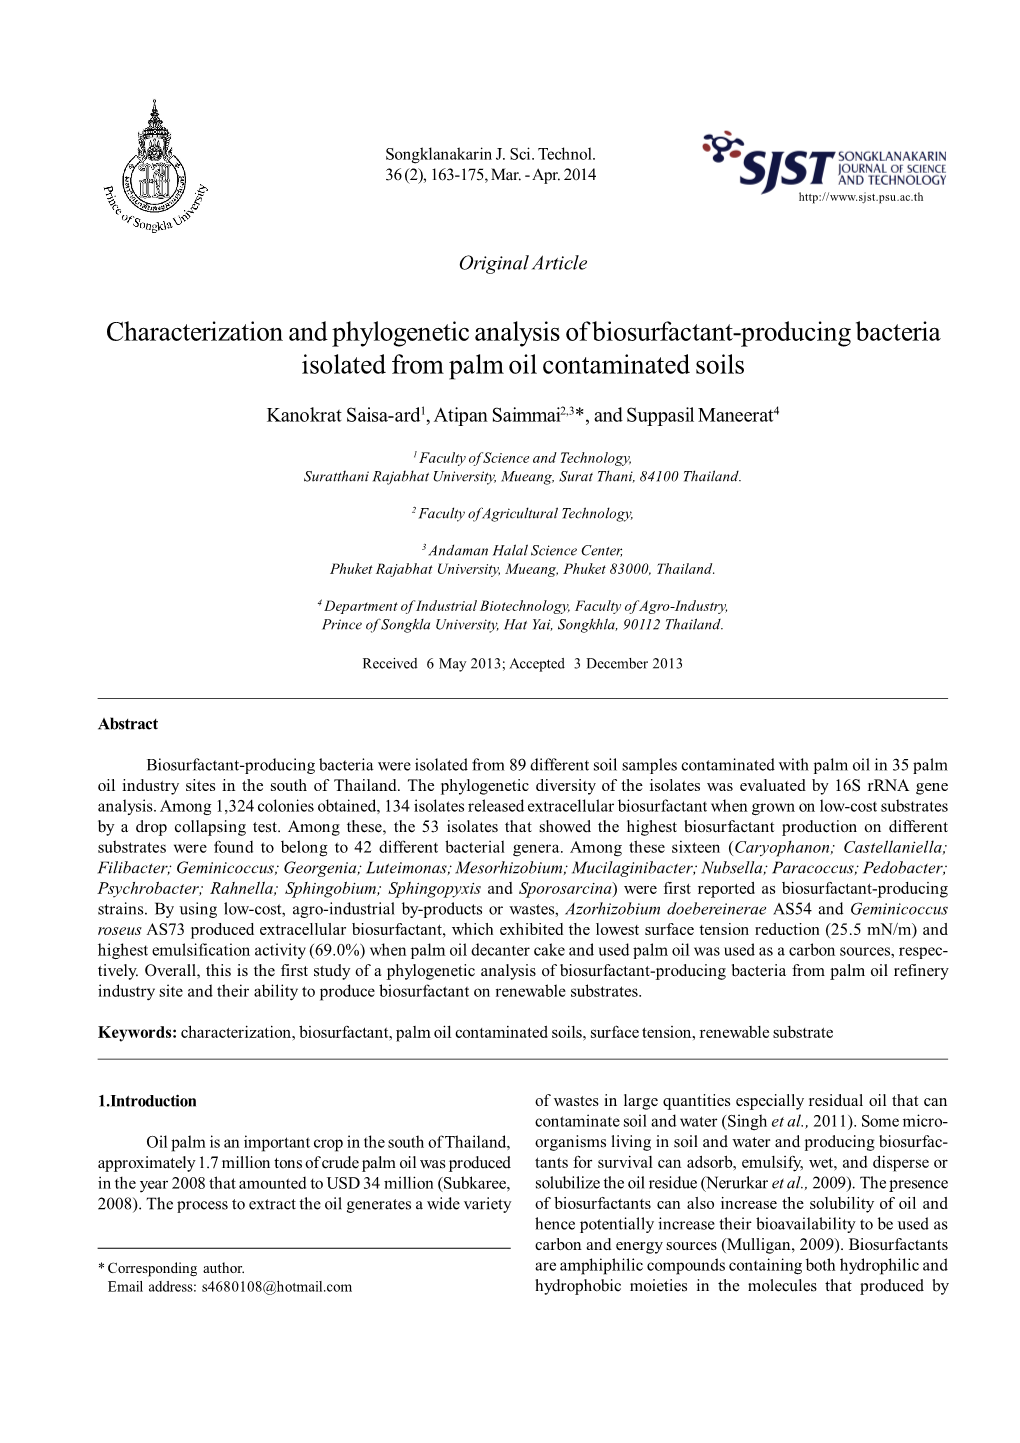 Characterization and Phylogenetic Analysis of Biosurfactant-Producing Bacteria Isolated from Palm Oil Contaminated Soils